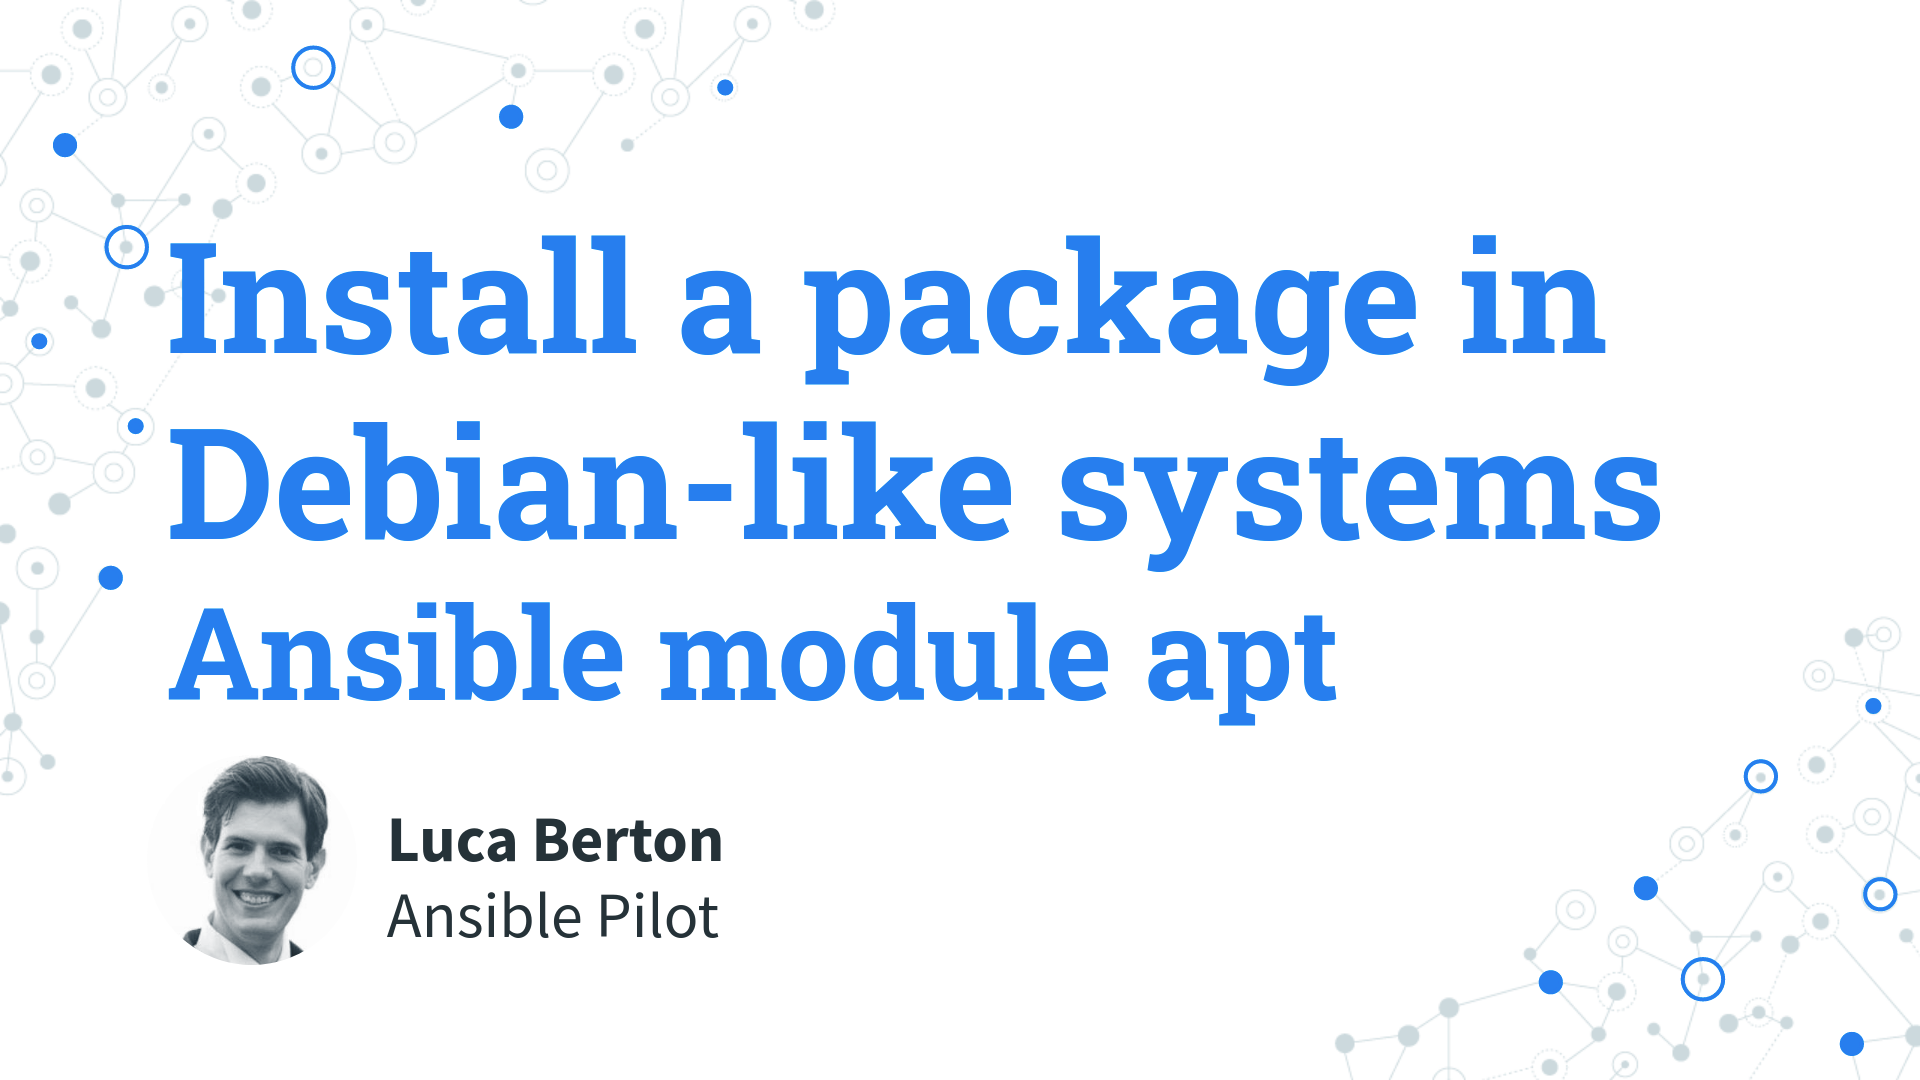 Install a package in Debian-like systems - Ansible module apt